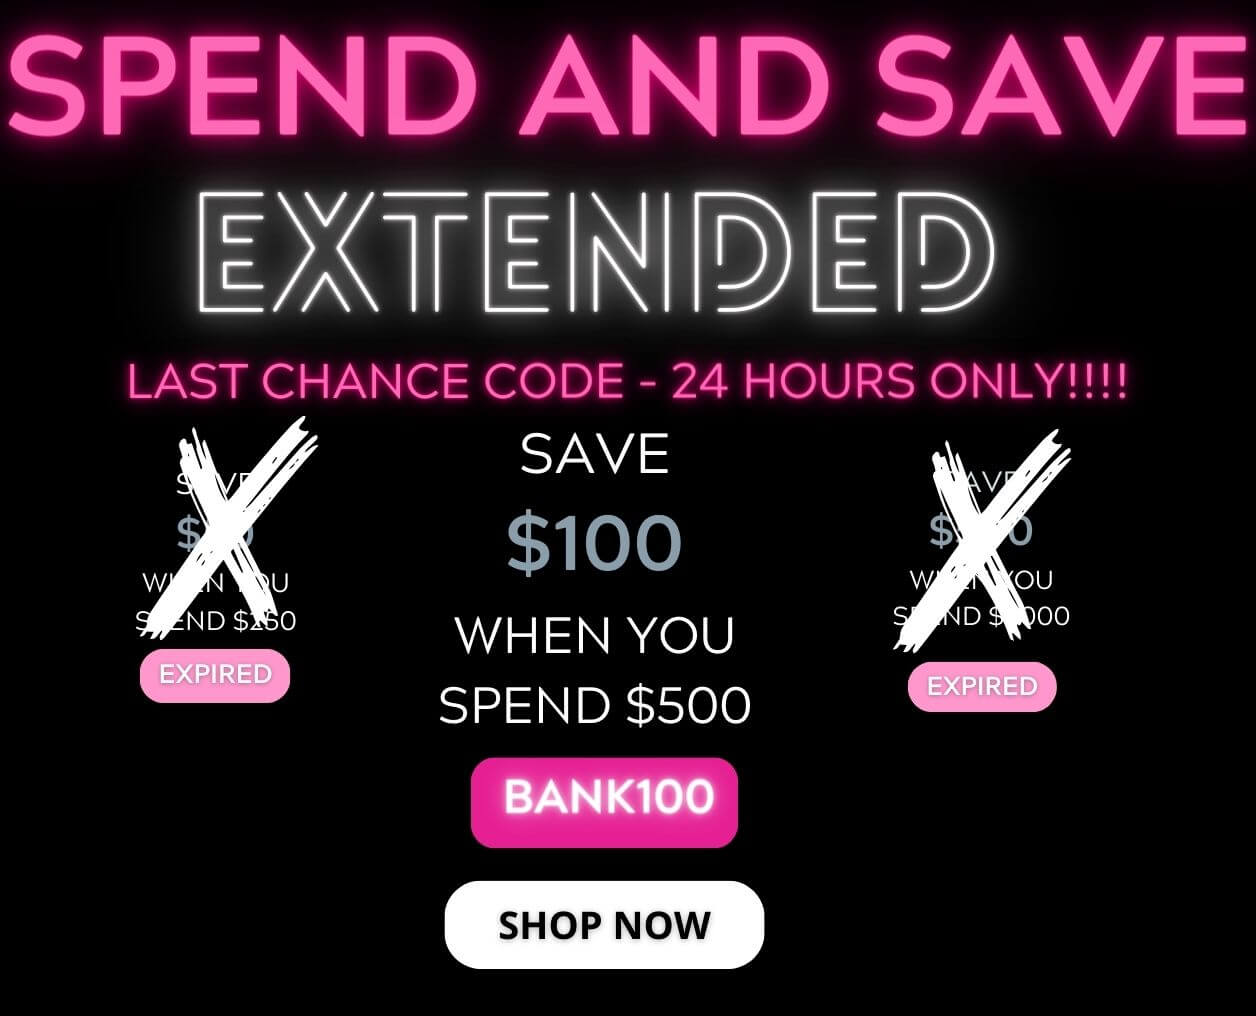 LAST CHANCE DISCOUNT CODE